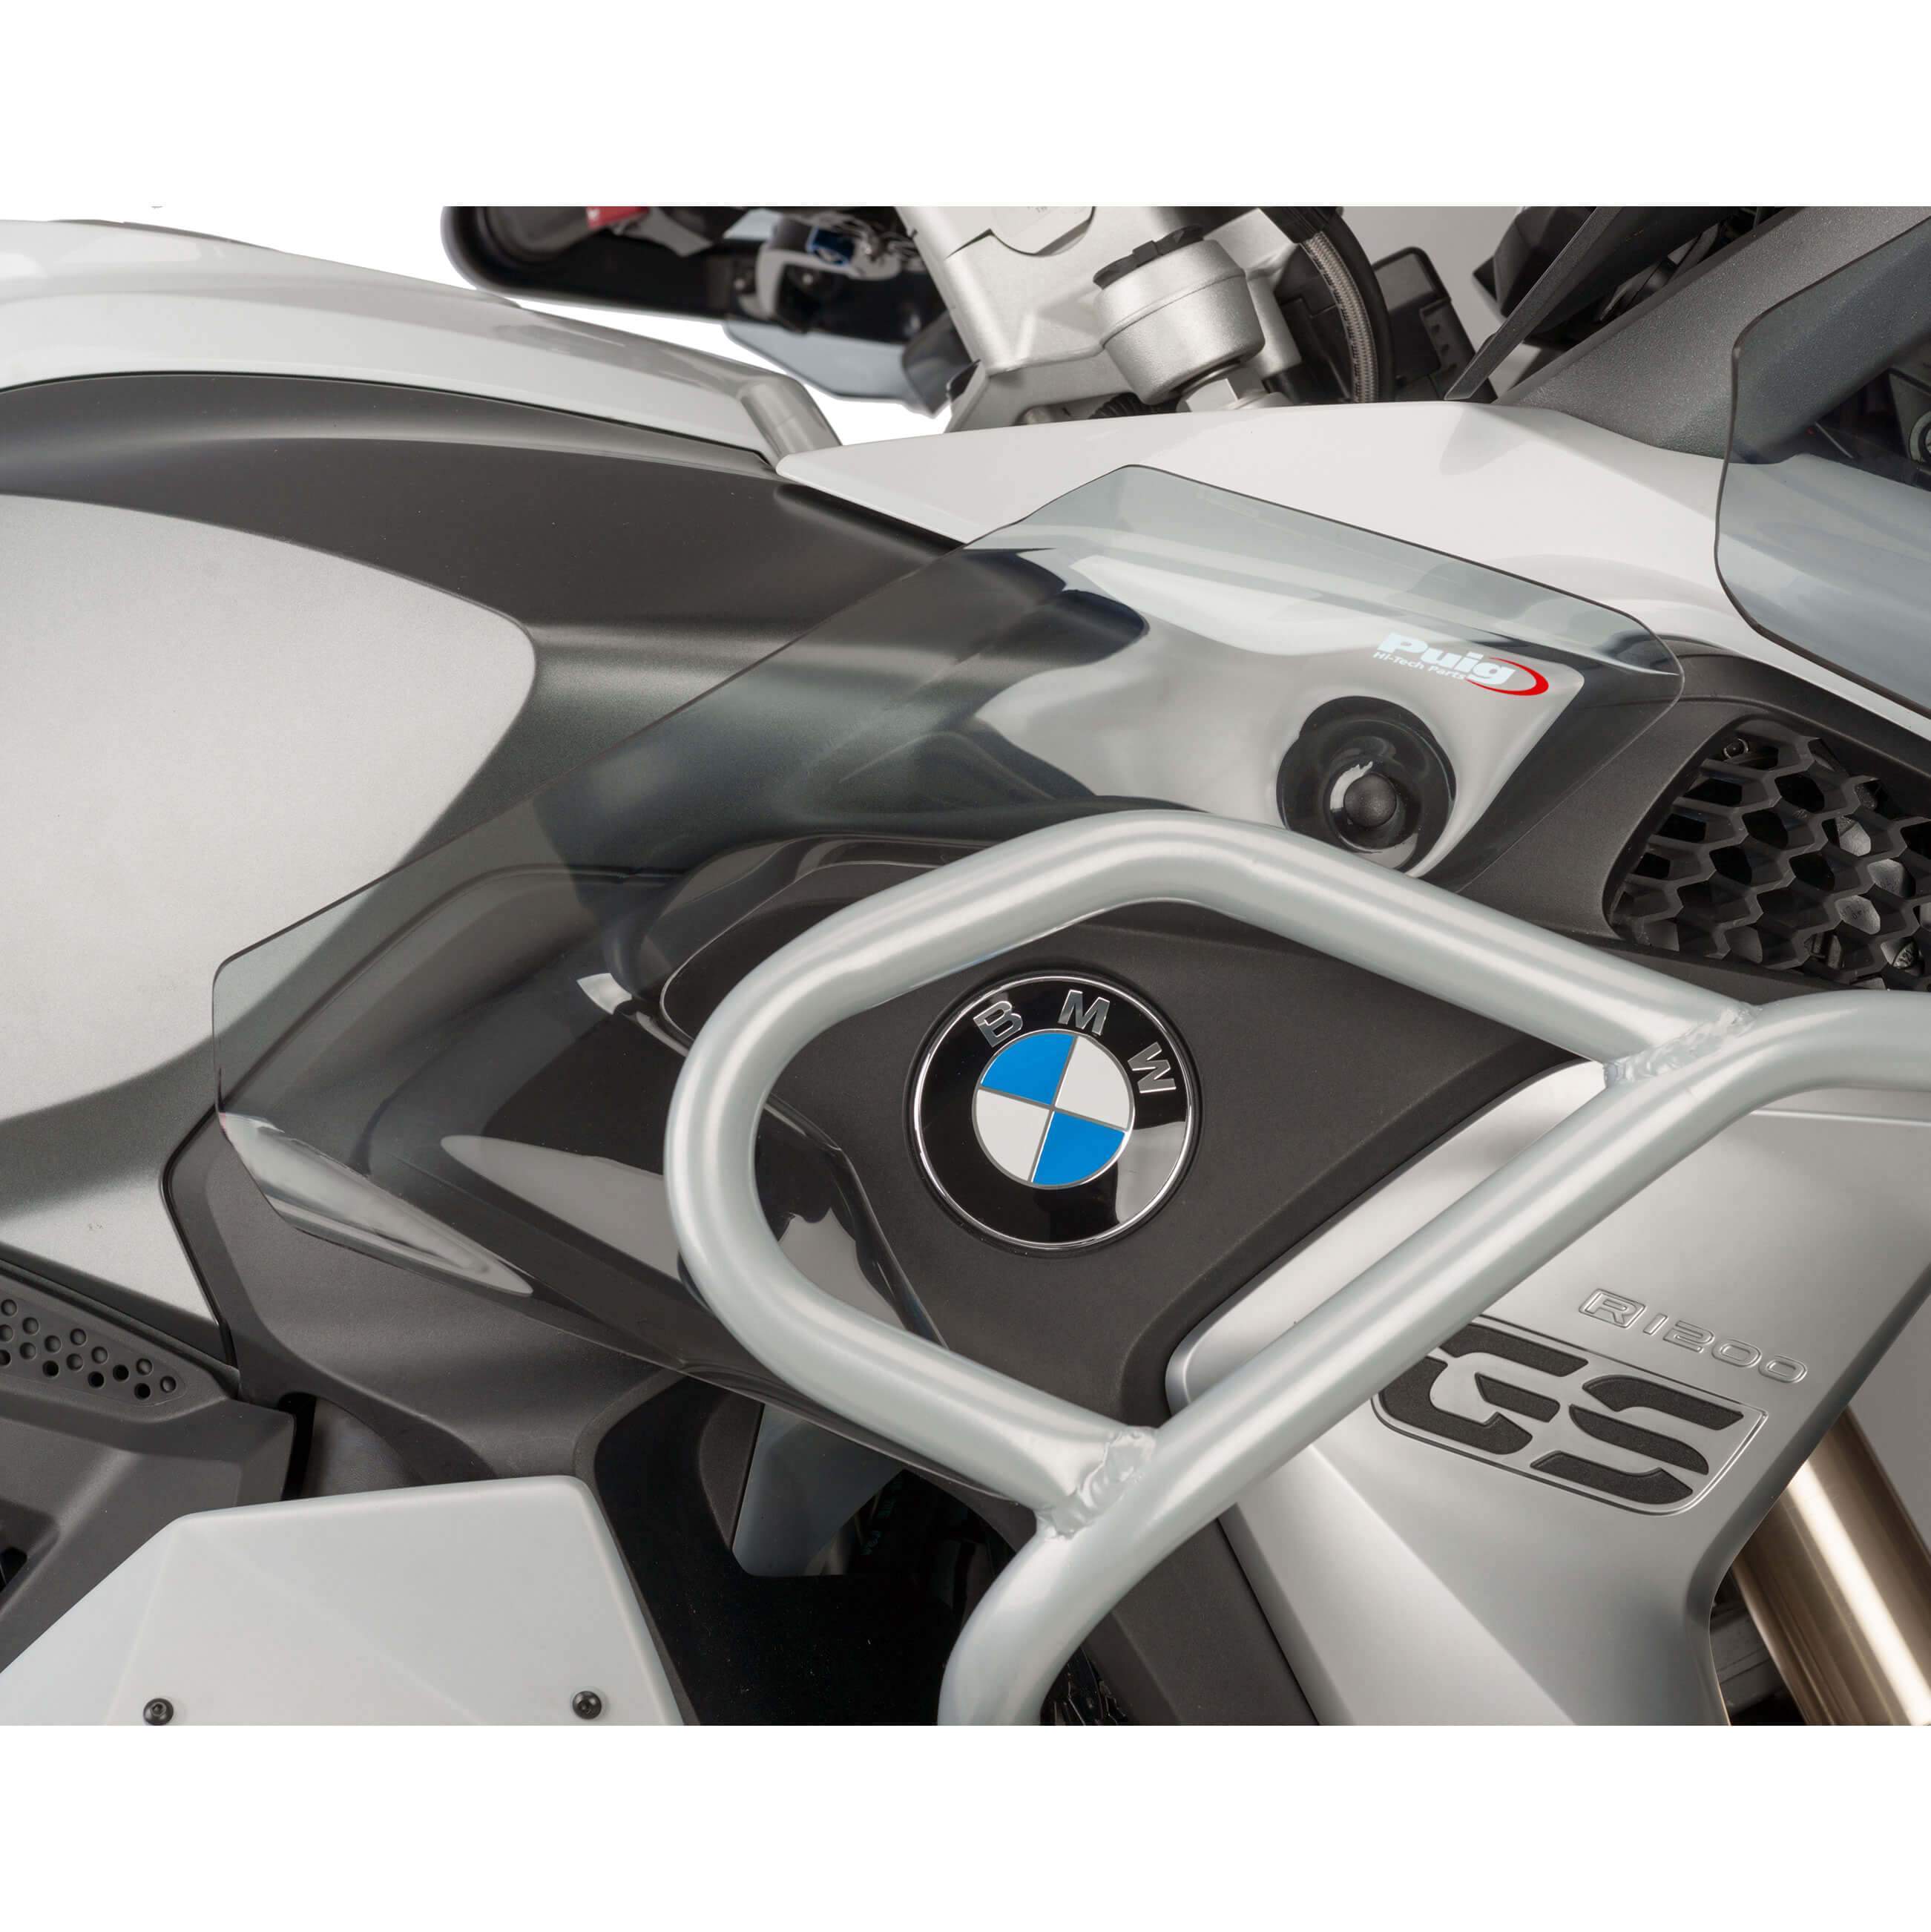 Puig Lower Wind Deflectors | Light Smoke | BMW R1250 GS 2018>Current-M9848H-Wind Deflectors-Pyramid Motorcycle Accessories